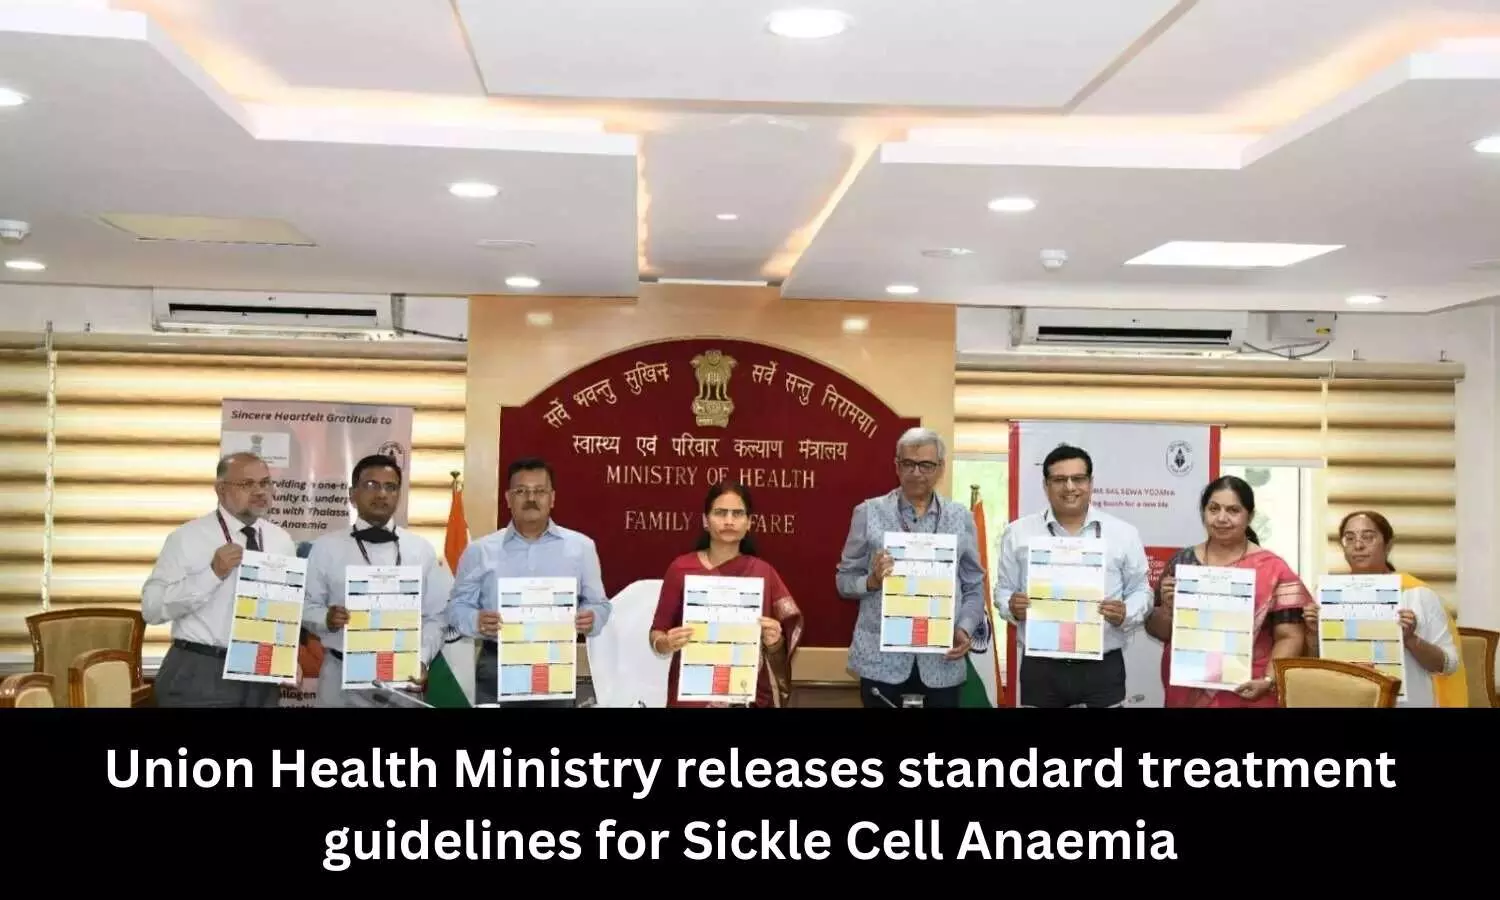 Health Ministry issues standard treatment guidelines for Sickle Cell Anaemia